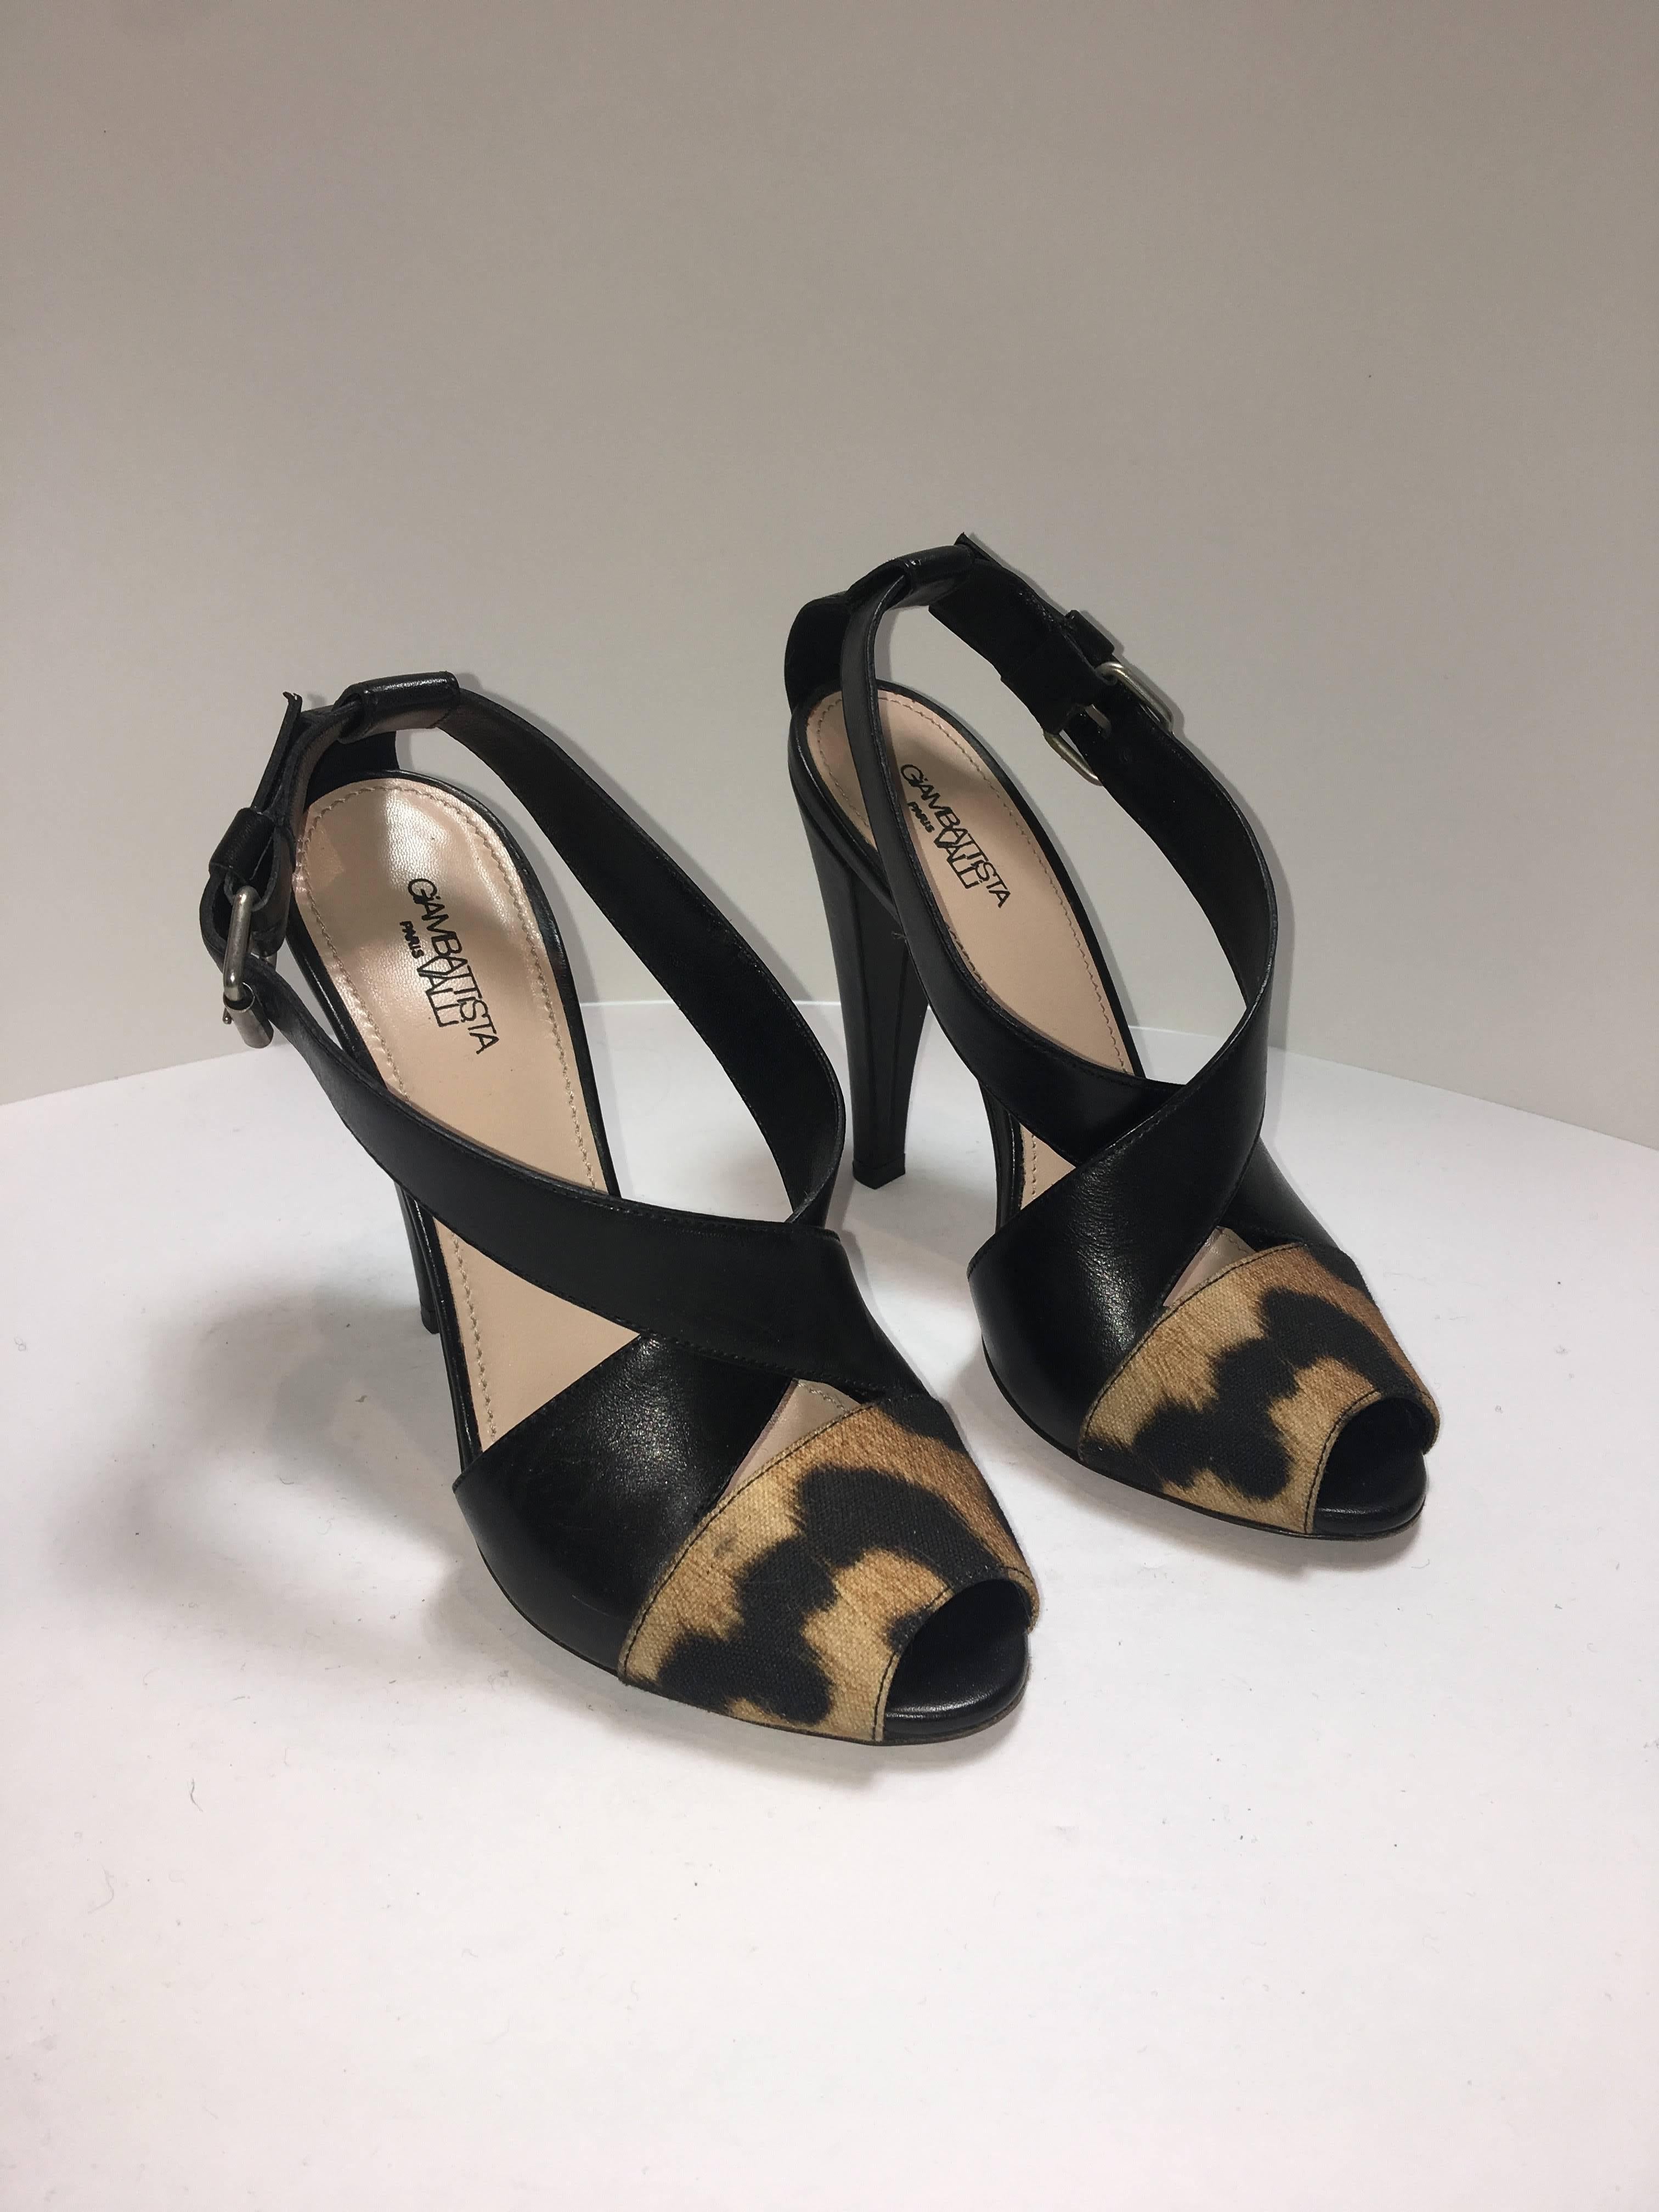 Giambattista Valli Pumps in Black/ Leopard. Peep Toe with Cross-Over Front and Side Buckle in size 35.5.